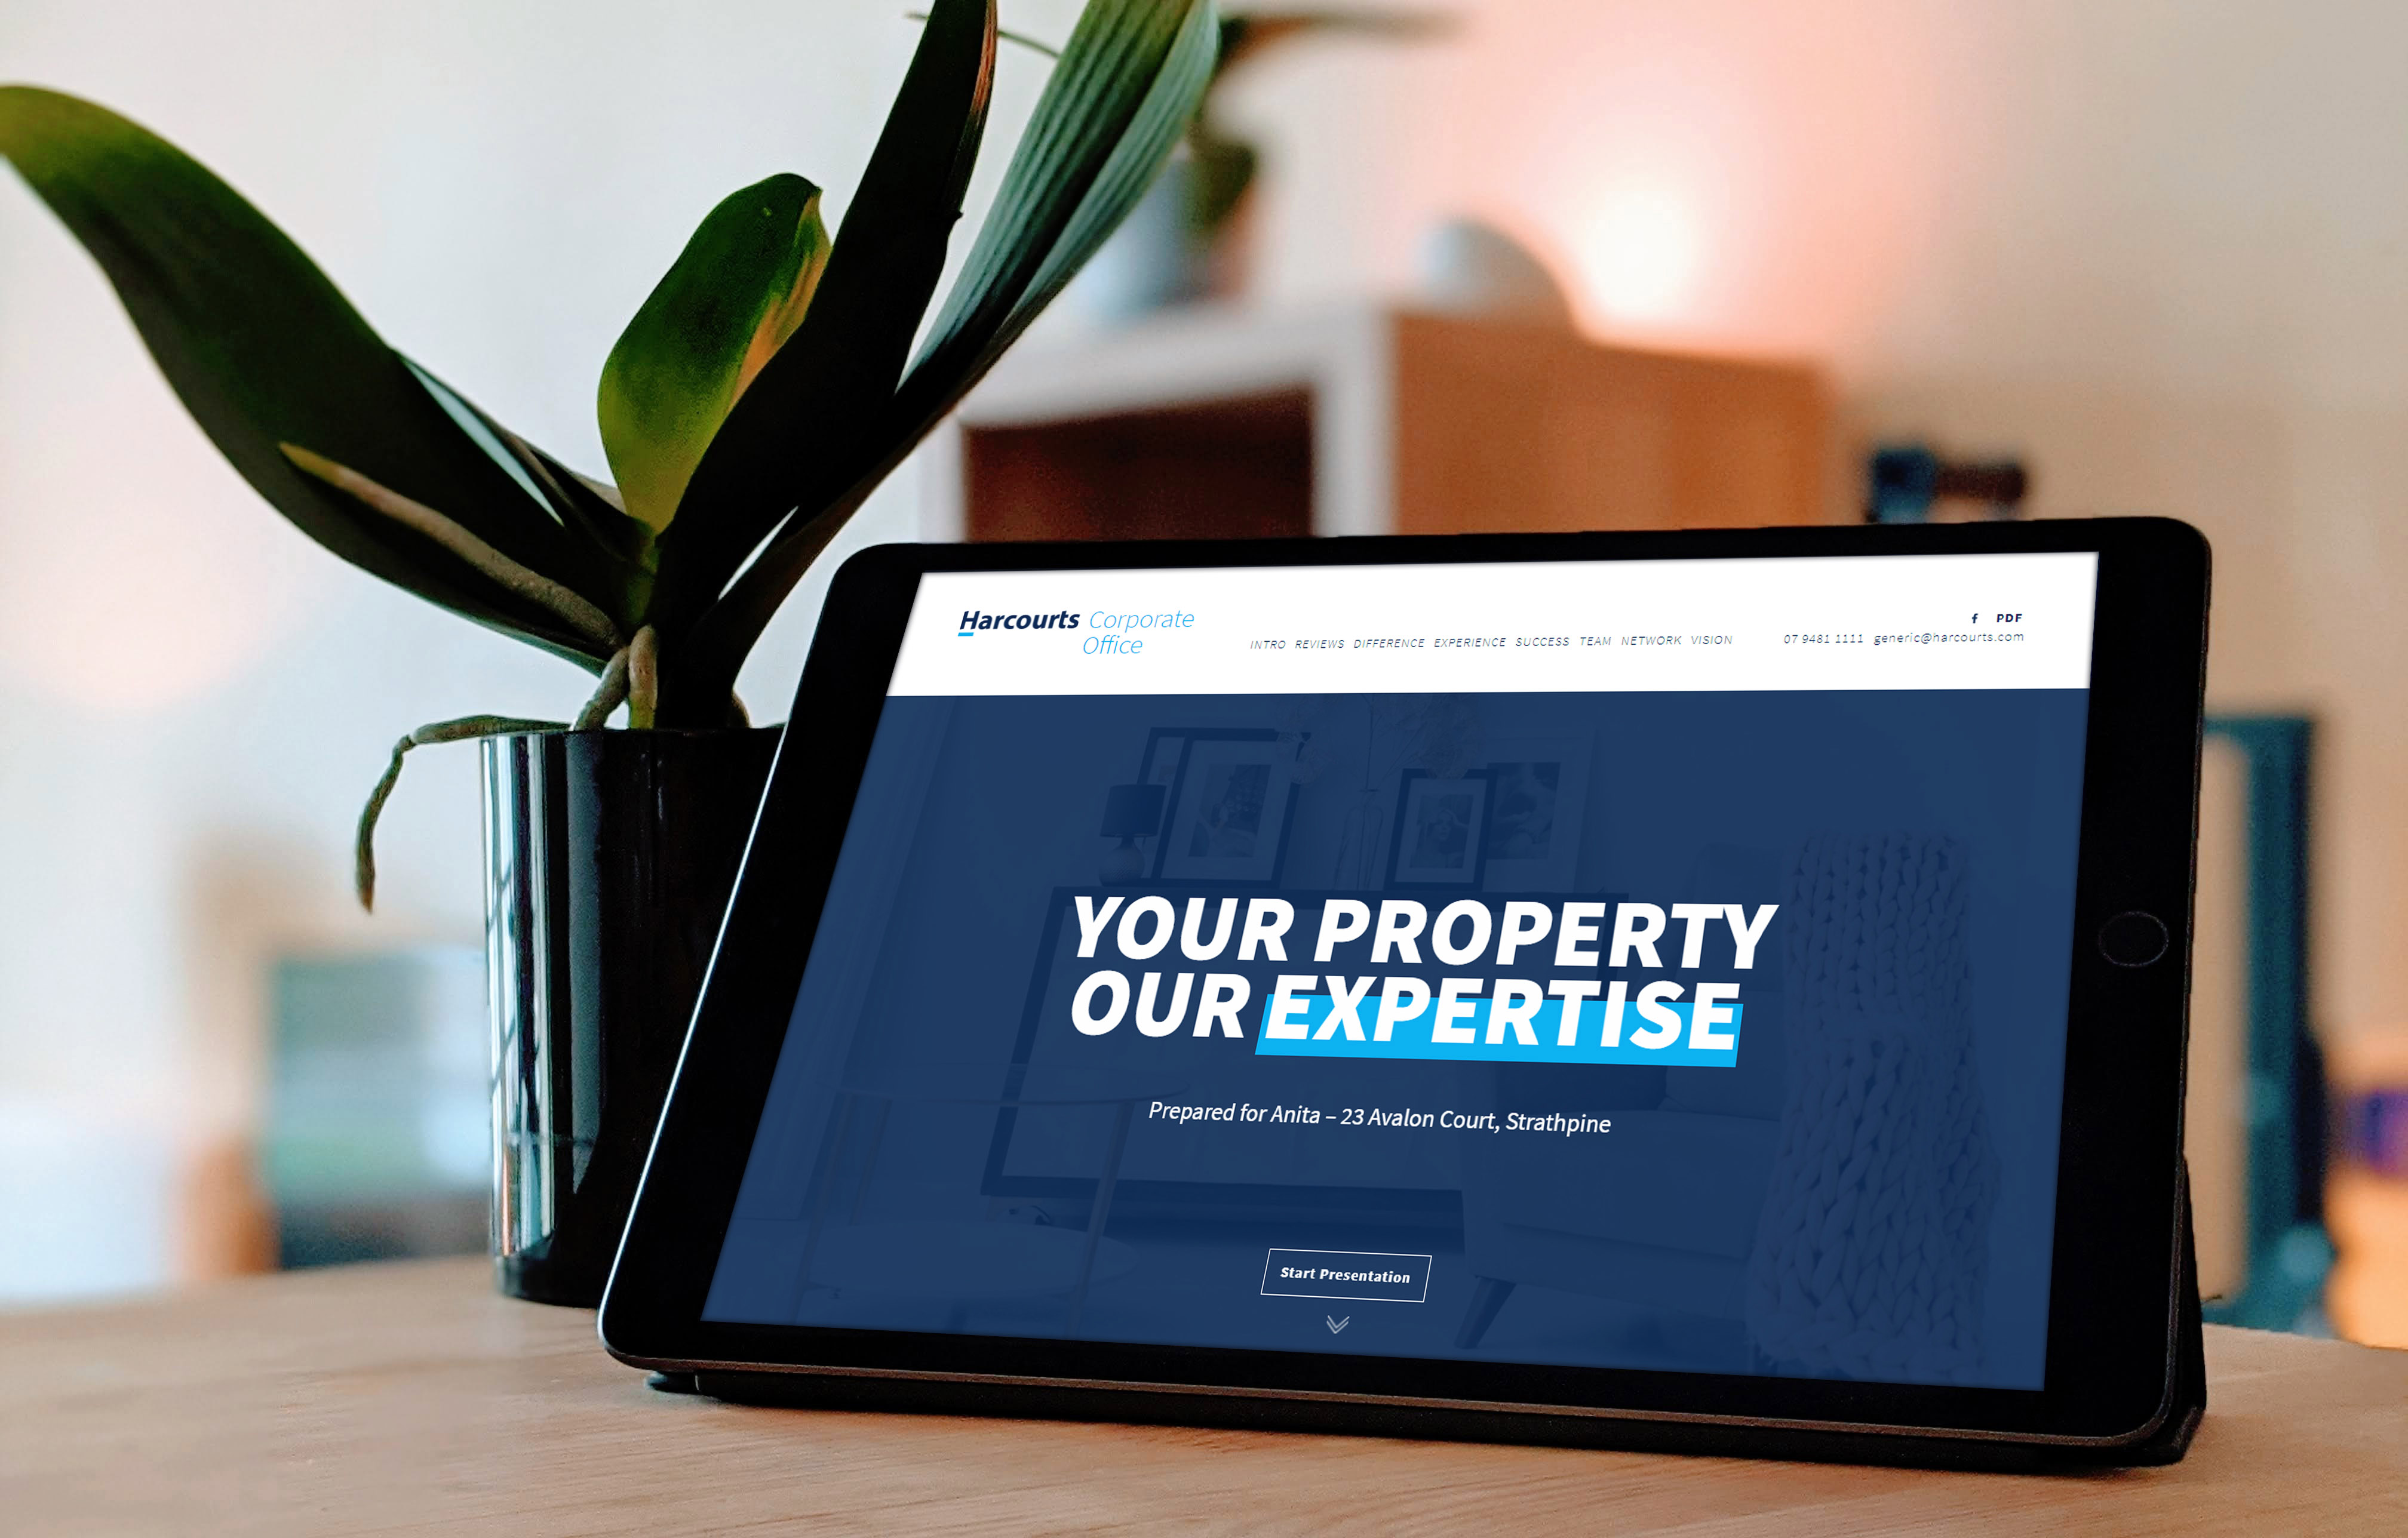 Harcourts Australia Partners With Realhub to Launch a New Proptech Offering.